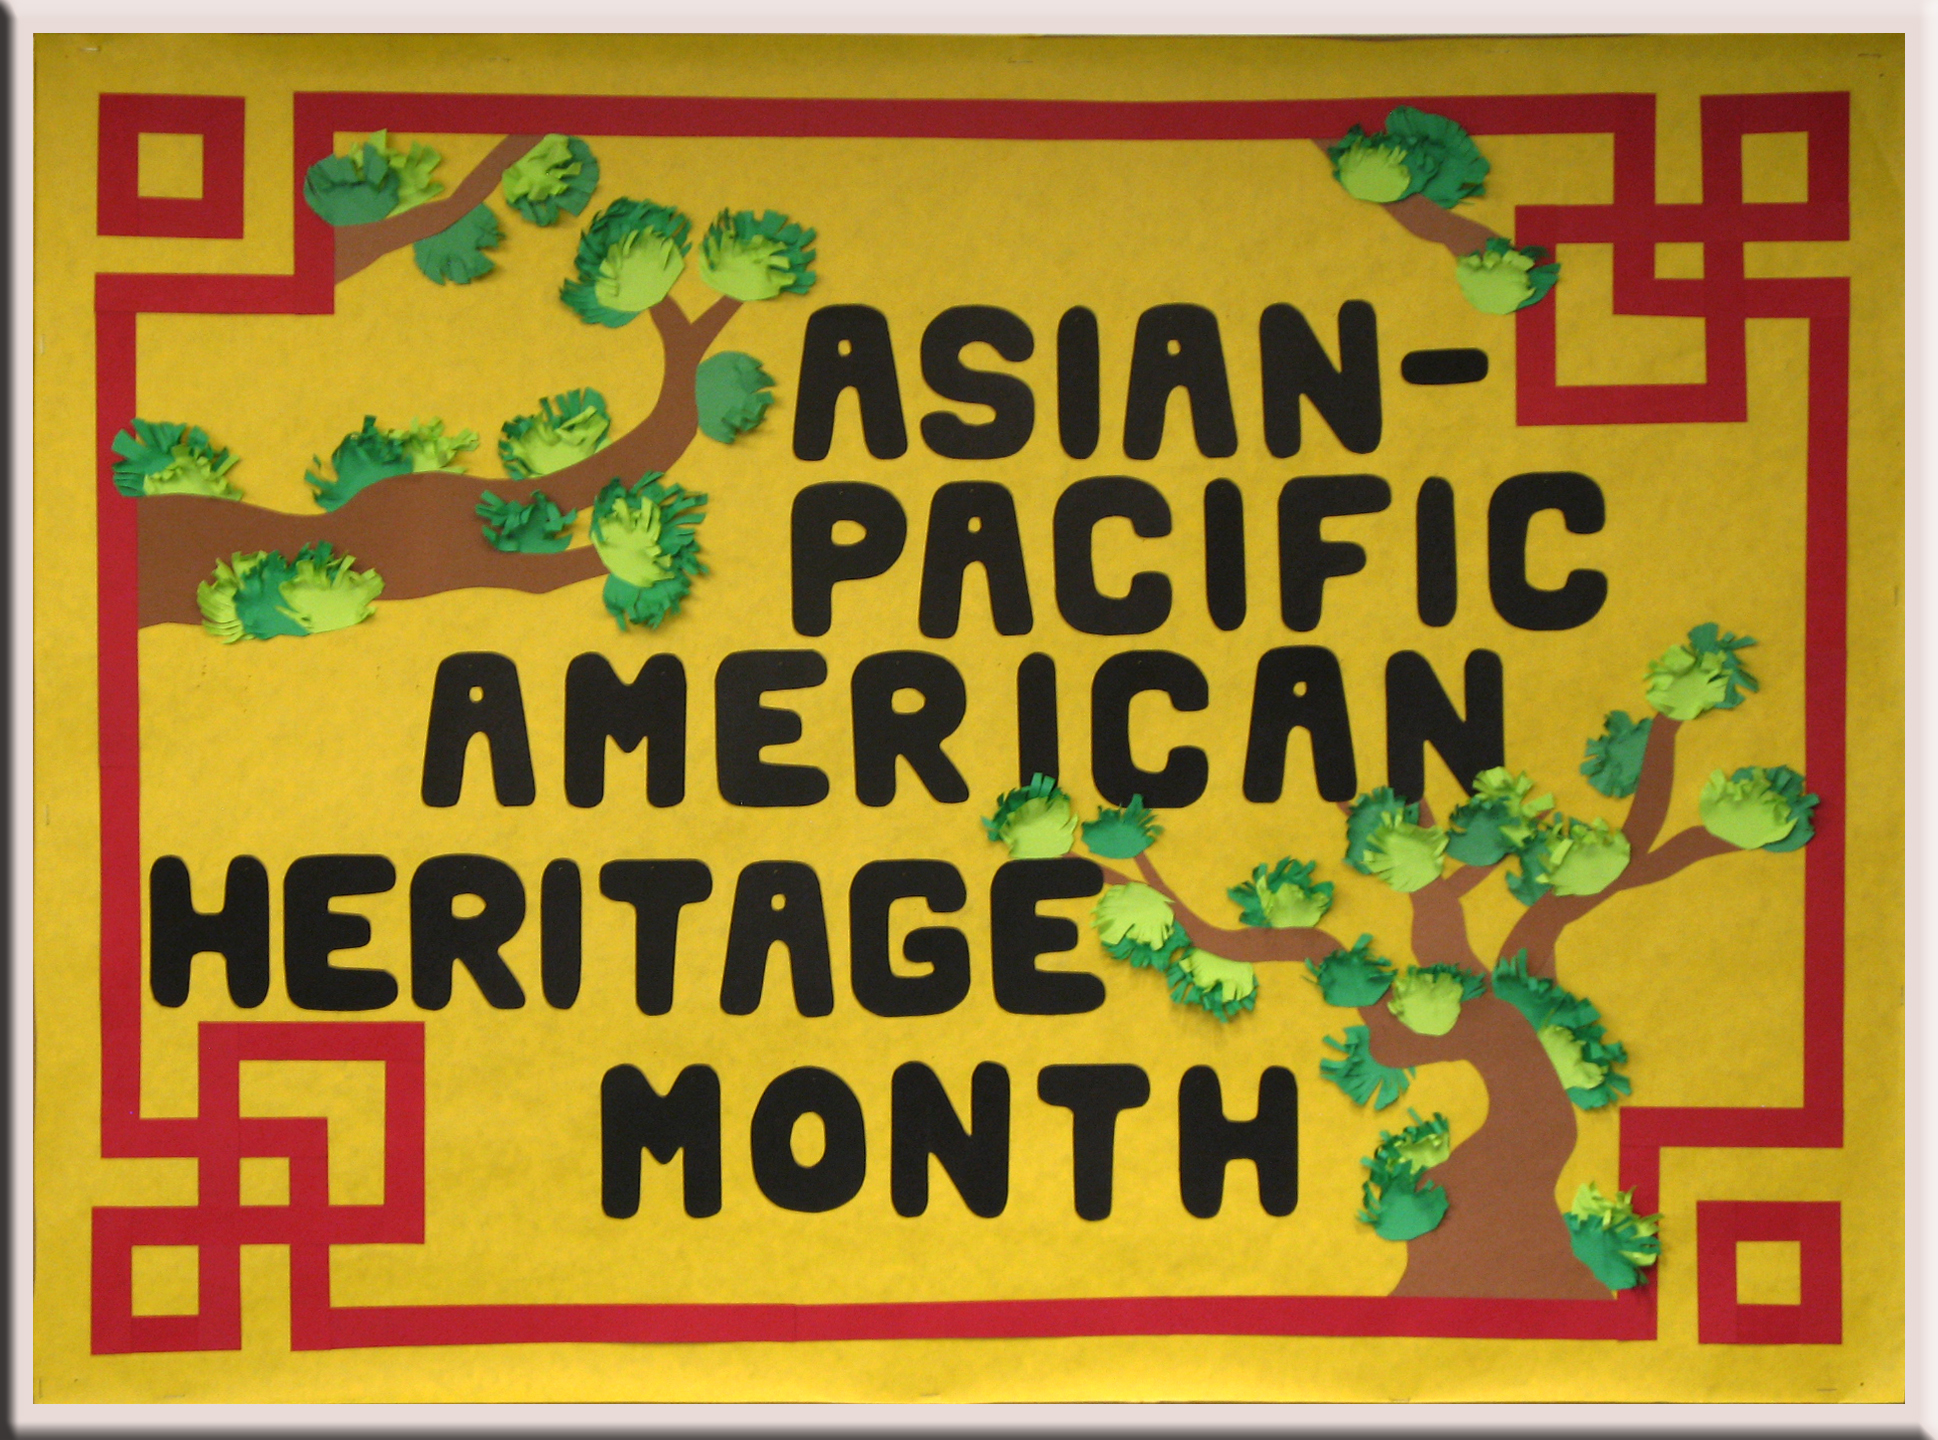 Baltimore county to honor 3 south asians for Asian Pacific American Heritage Month